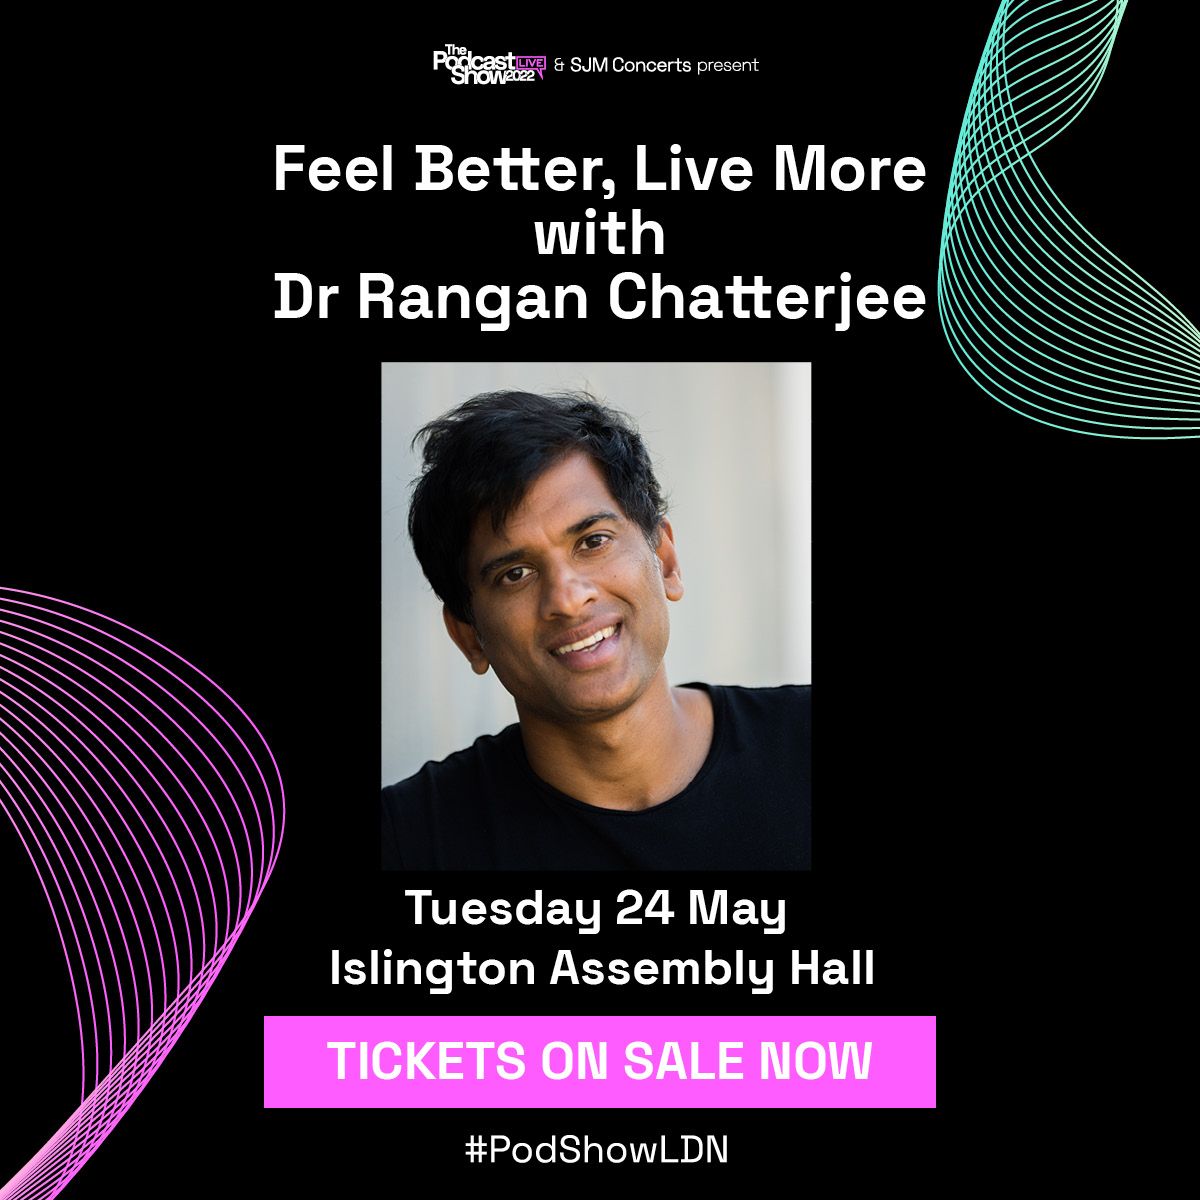 Feel Better, Live More with Dr Rangan Chaterjee